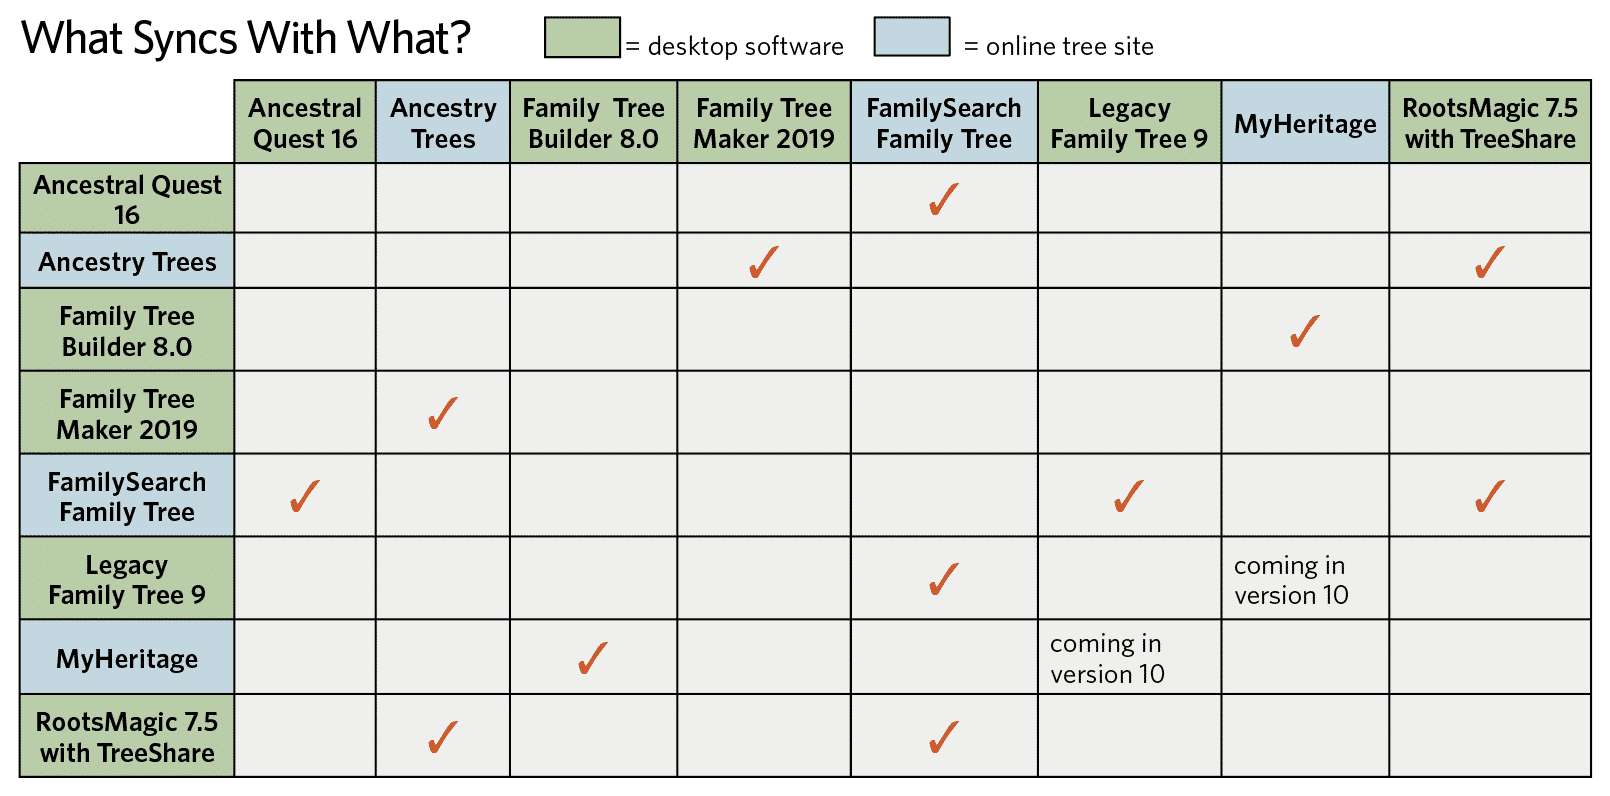 Chart of genealogy software and online tree syncing compatibility.